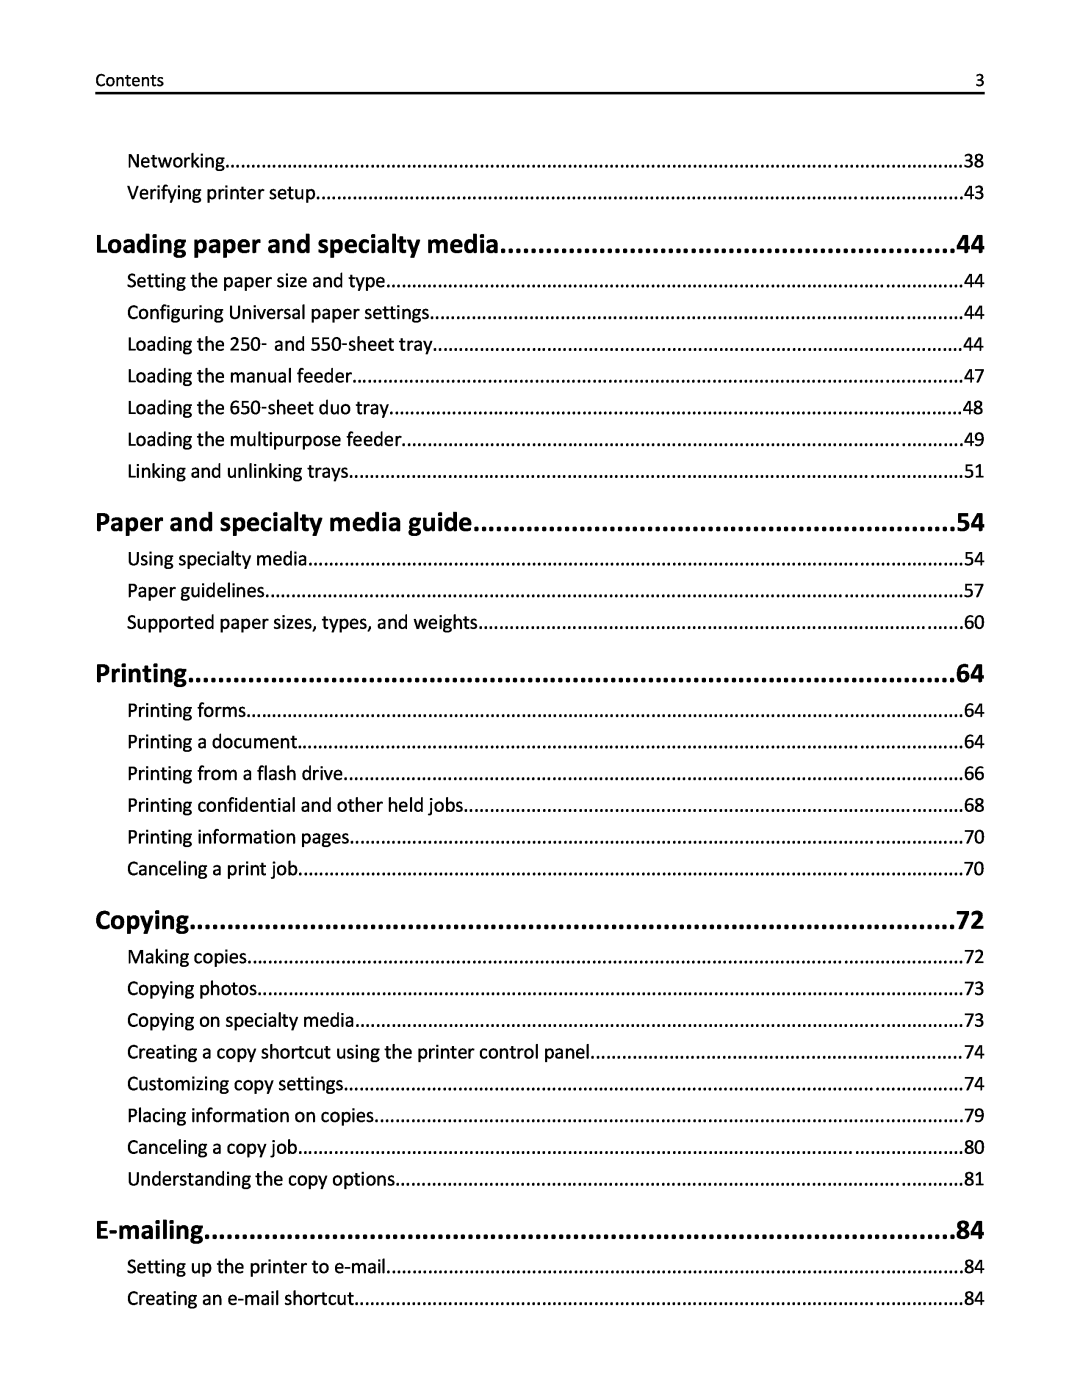 Lexmark 436 manual Loading paper and specialty media, Paper and specialty media guide, Printing, Copying, E-mailing 